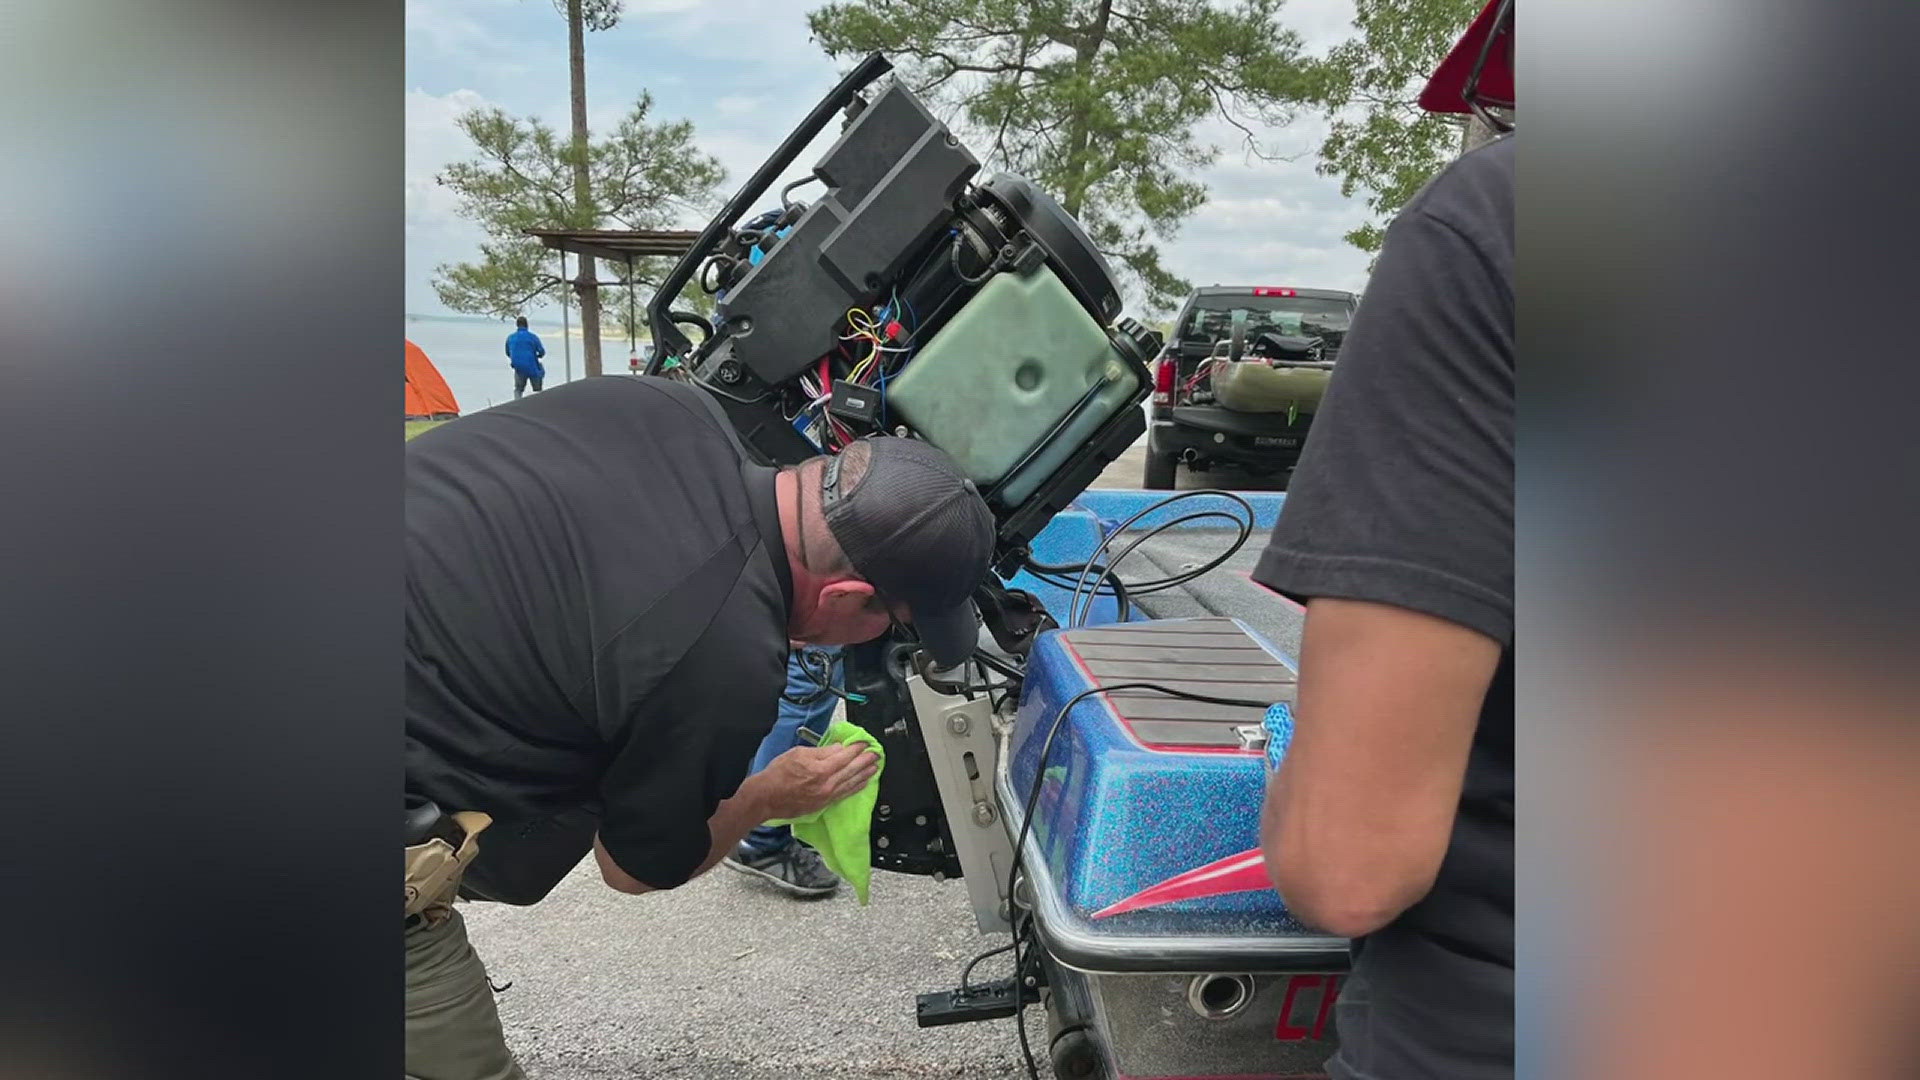 Game wardens from San Augustine, Sabine, Angelina, Jasper, Tyler and Nacogdoches County inspected 300 boats, 243 motors and 100 trailers during the tournament.